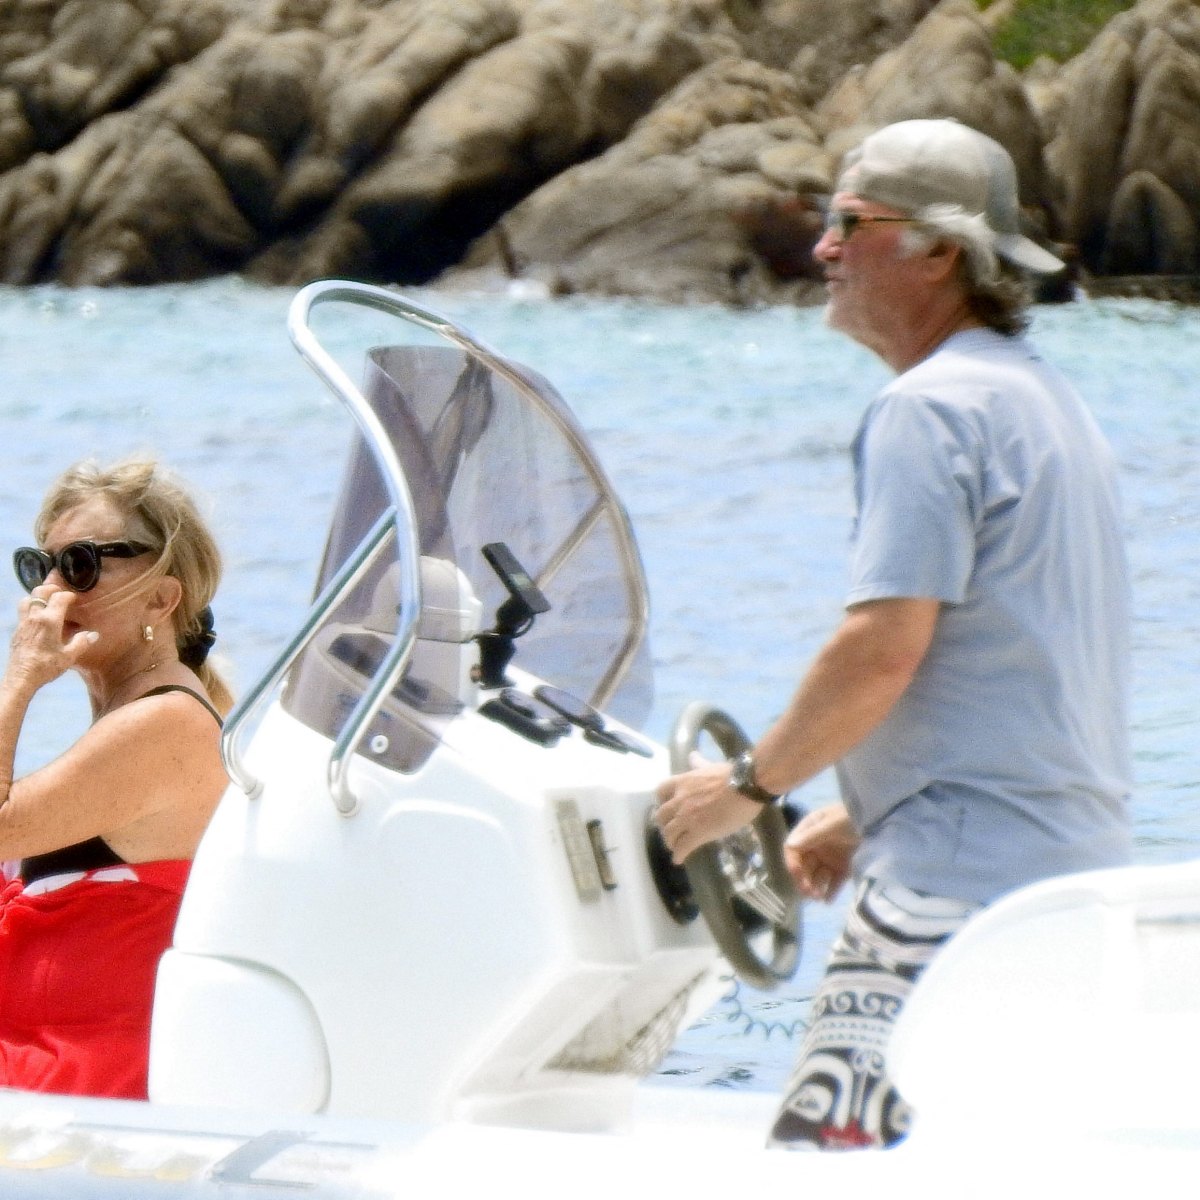 Goldie Hawn looks ageless in black bathing suit during Greece